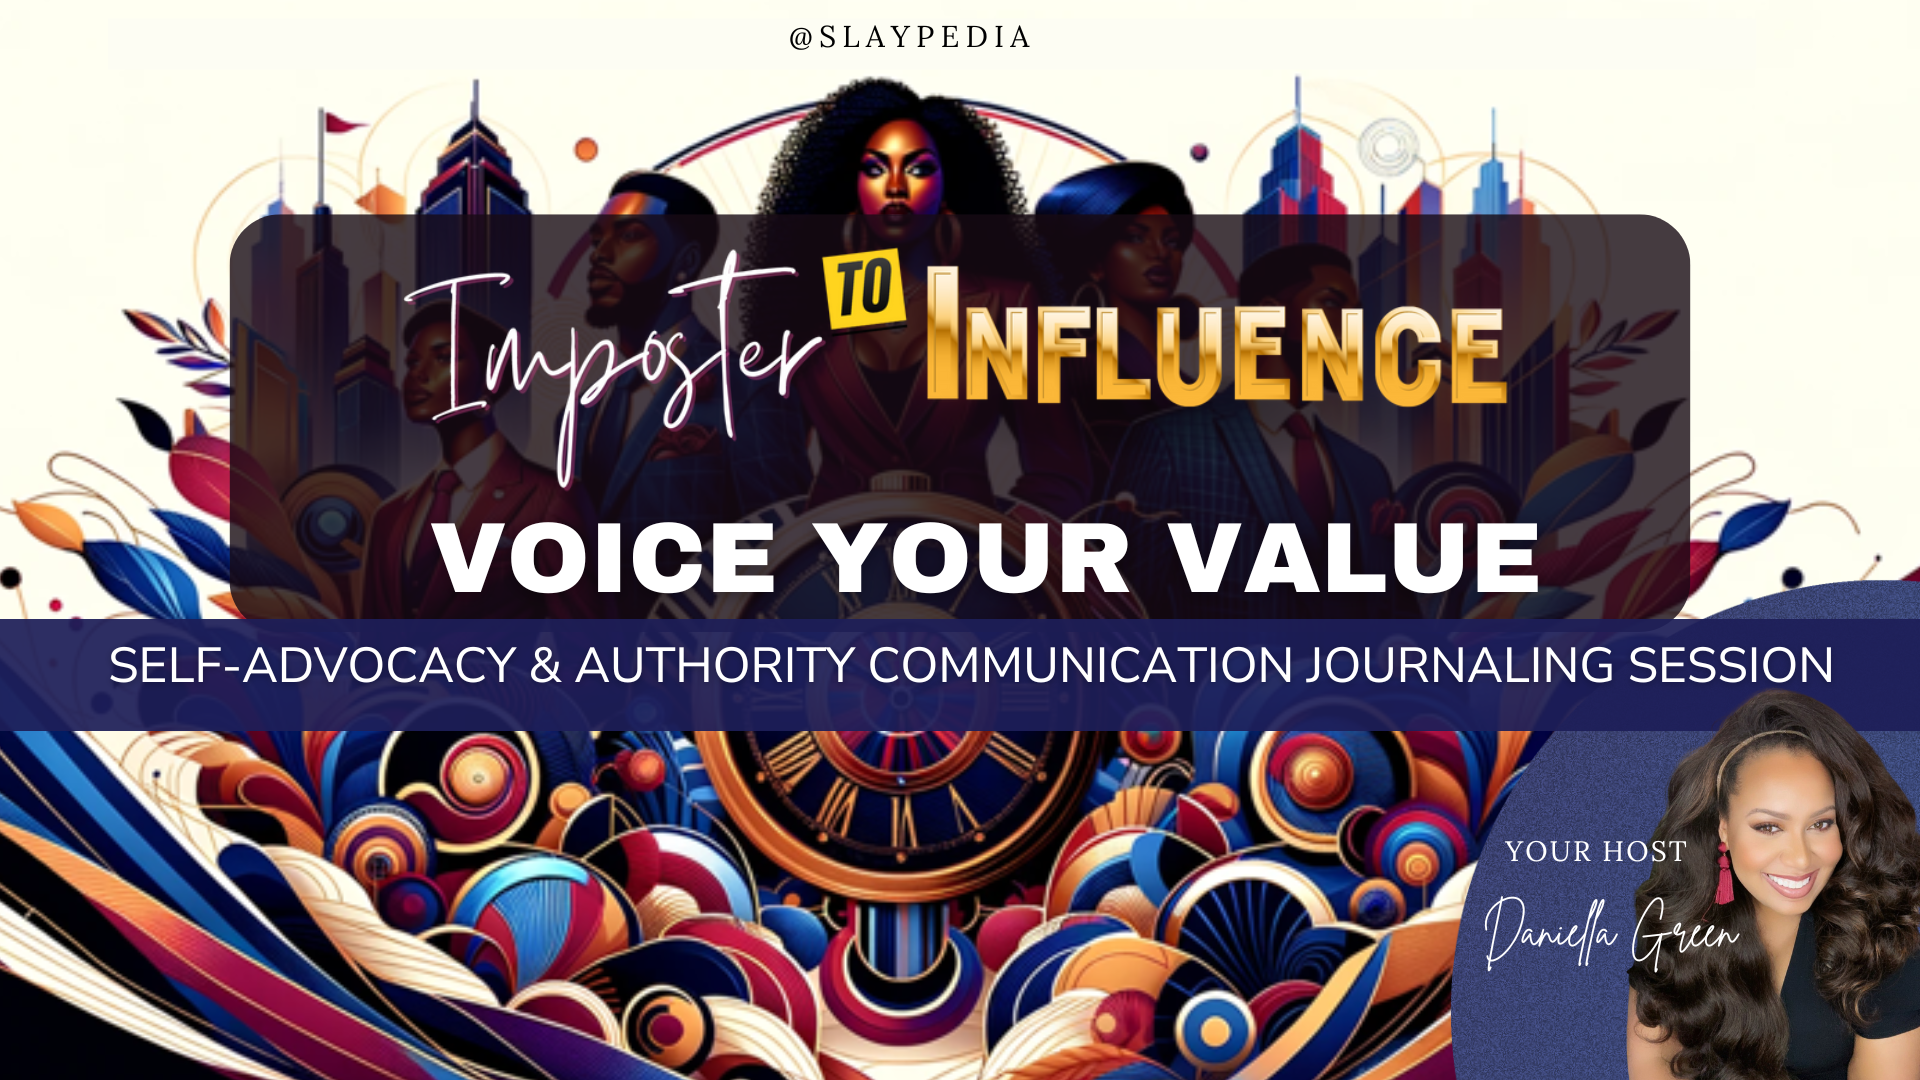 Imposter To Influence: Voice Your Value event cover photo